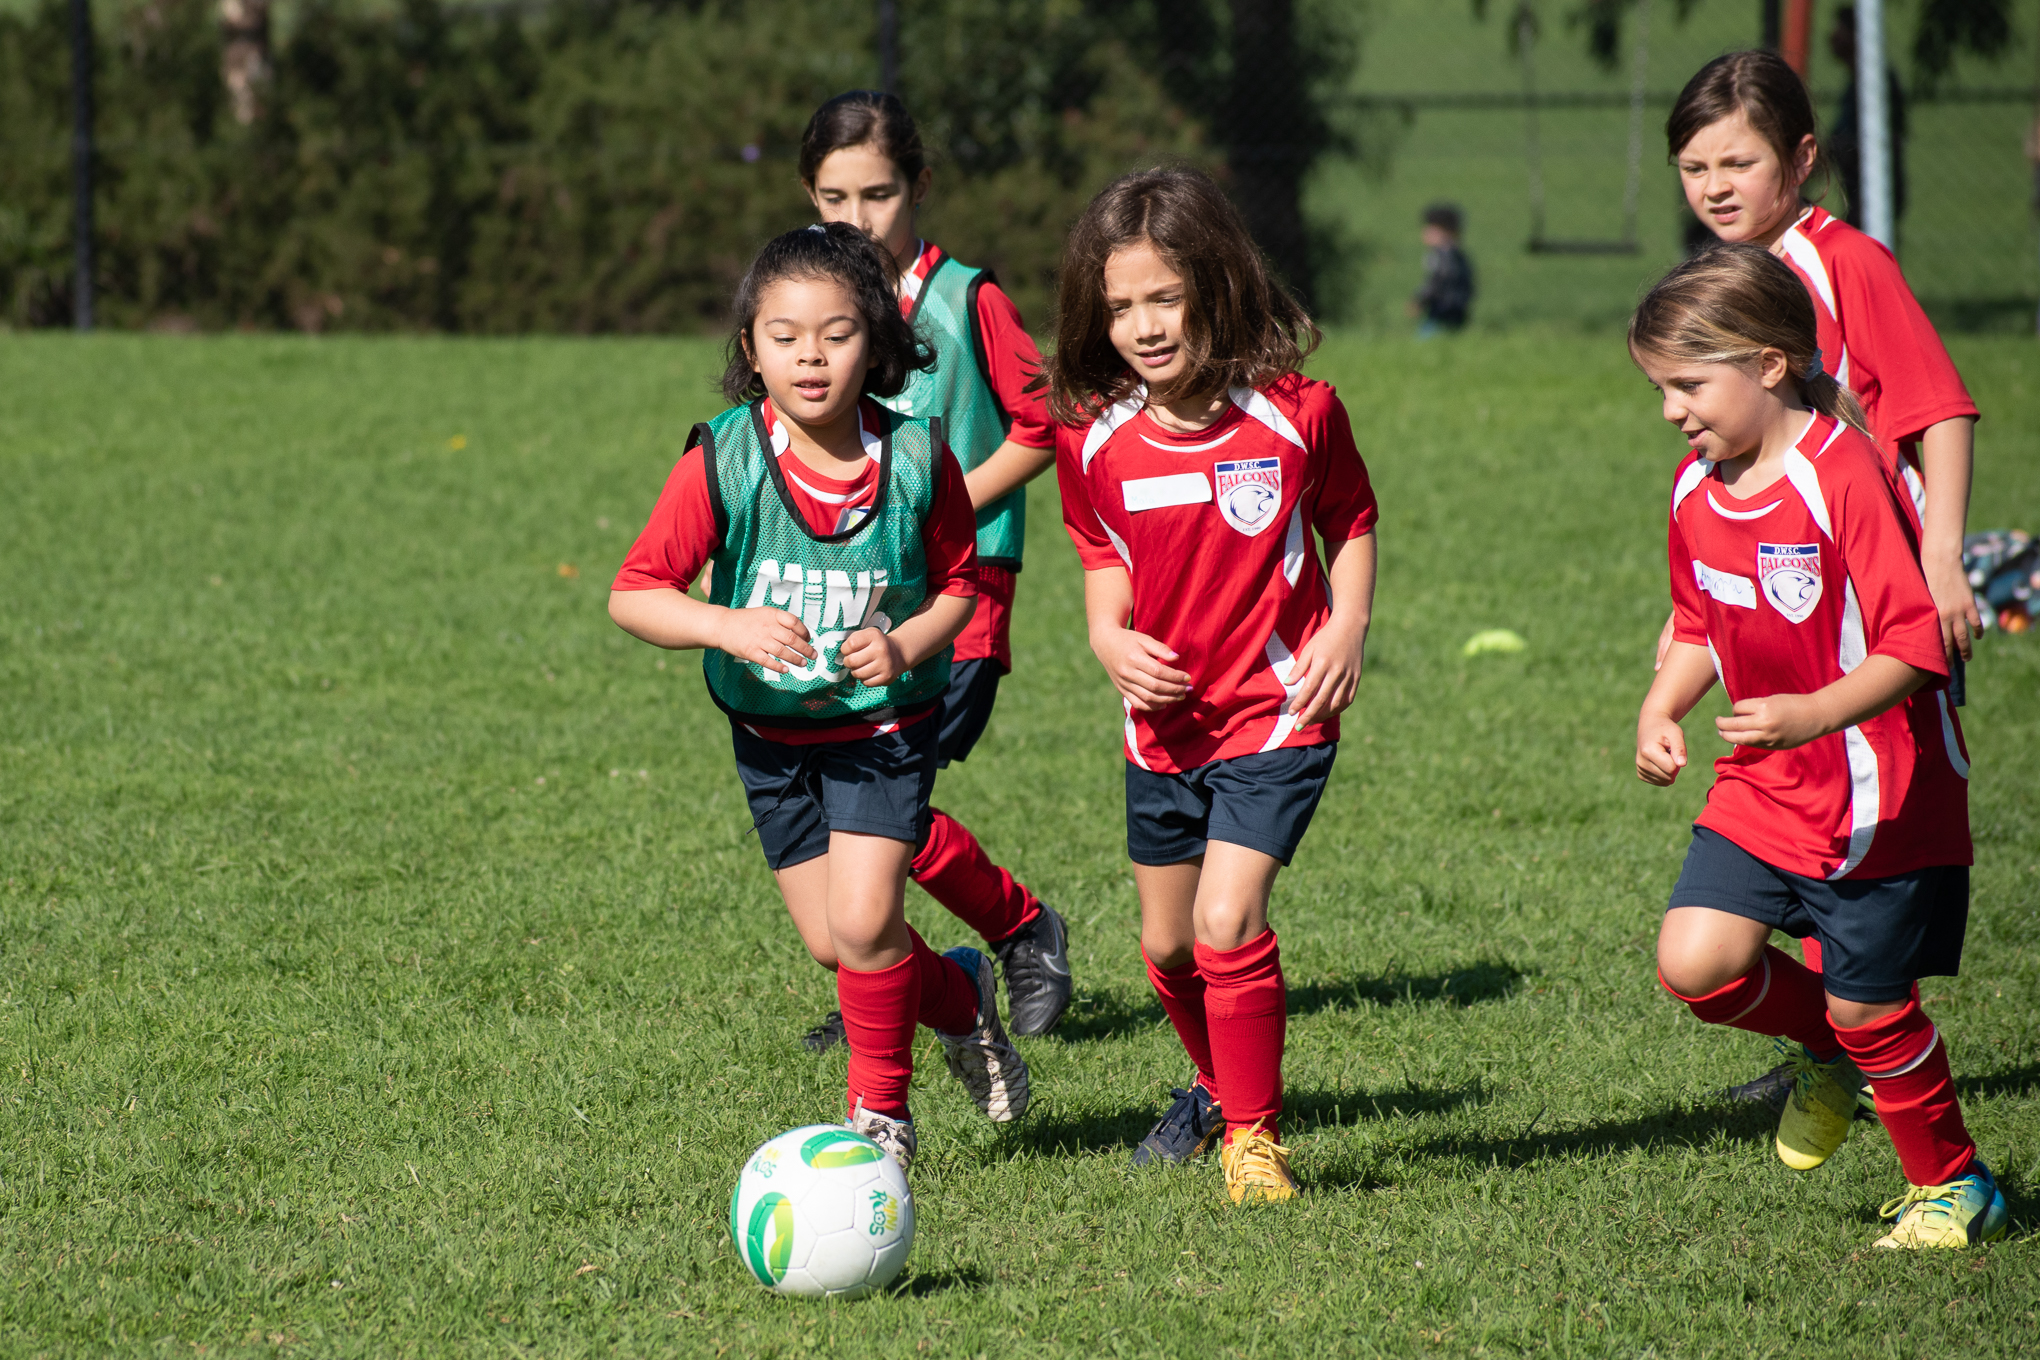 Why girls-only sport is important at a young age